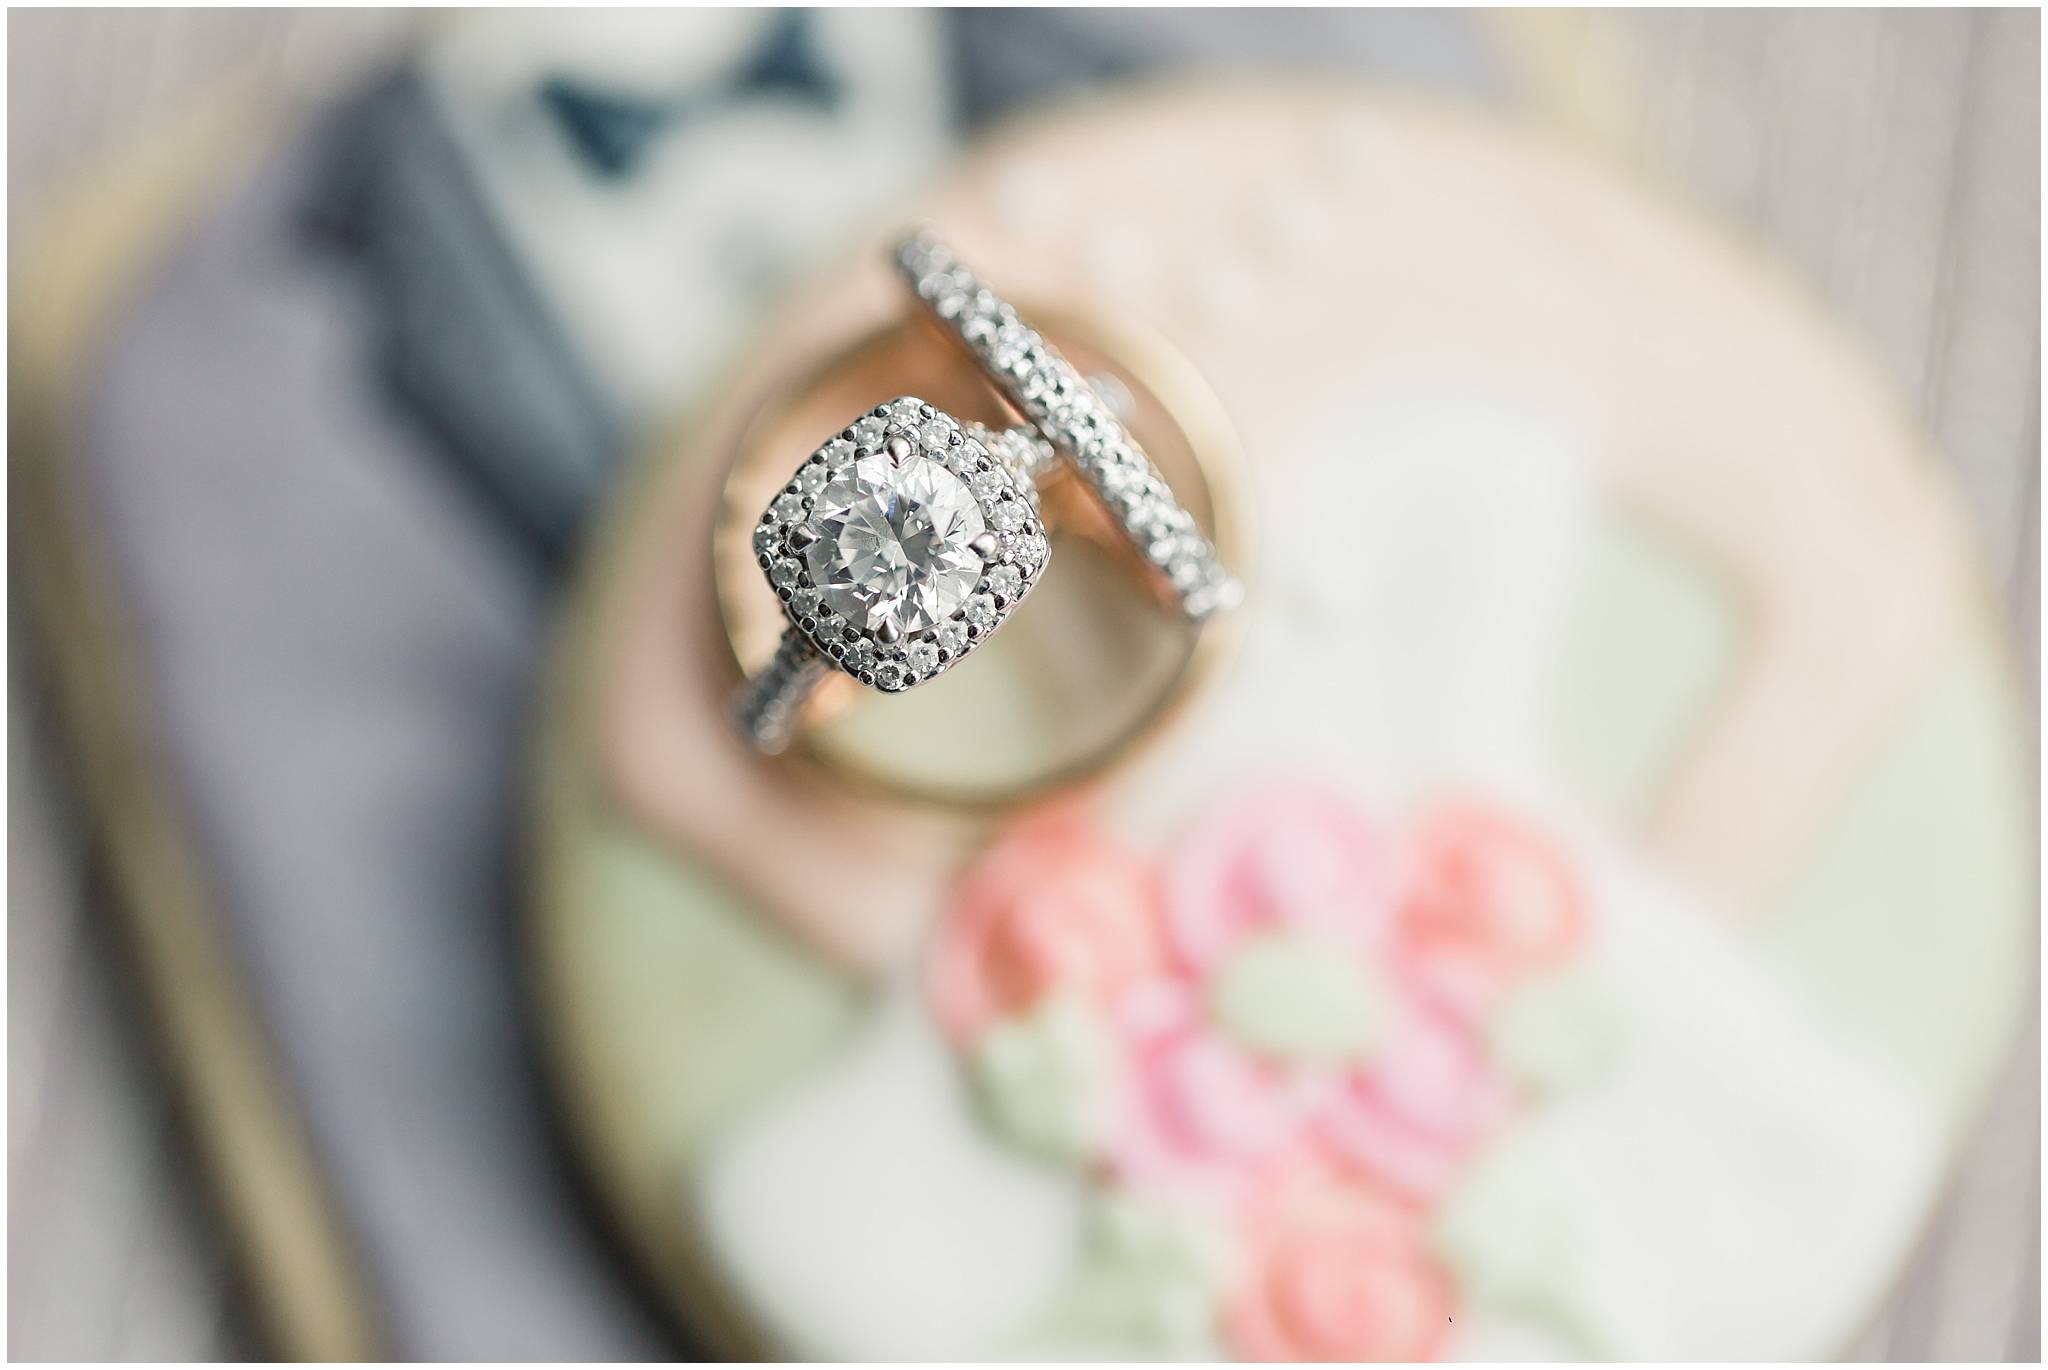 how to photograph wedding rings engagement